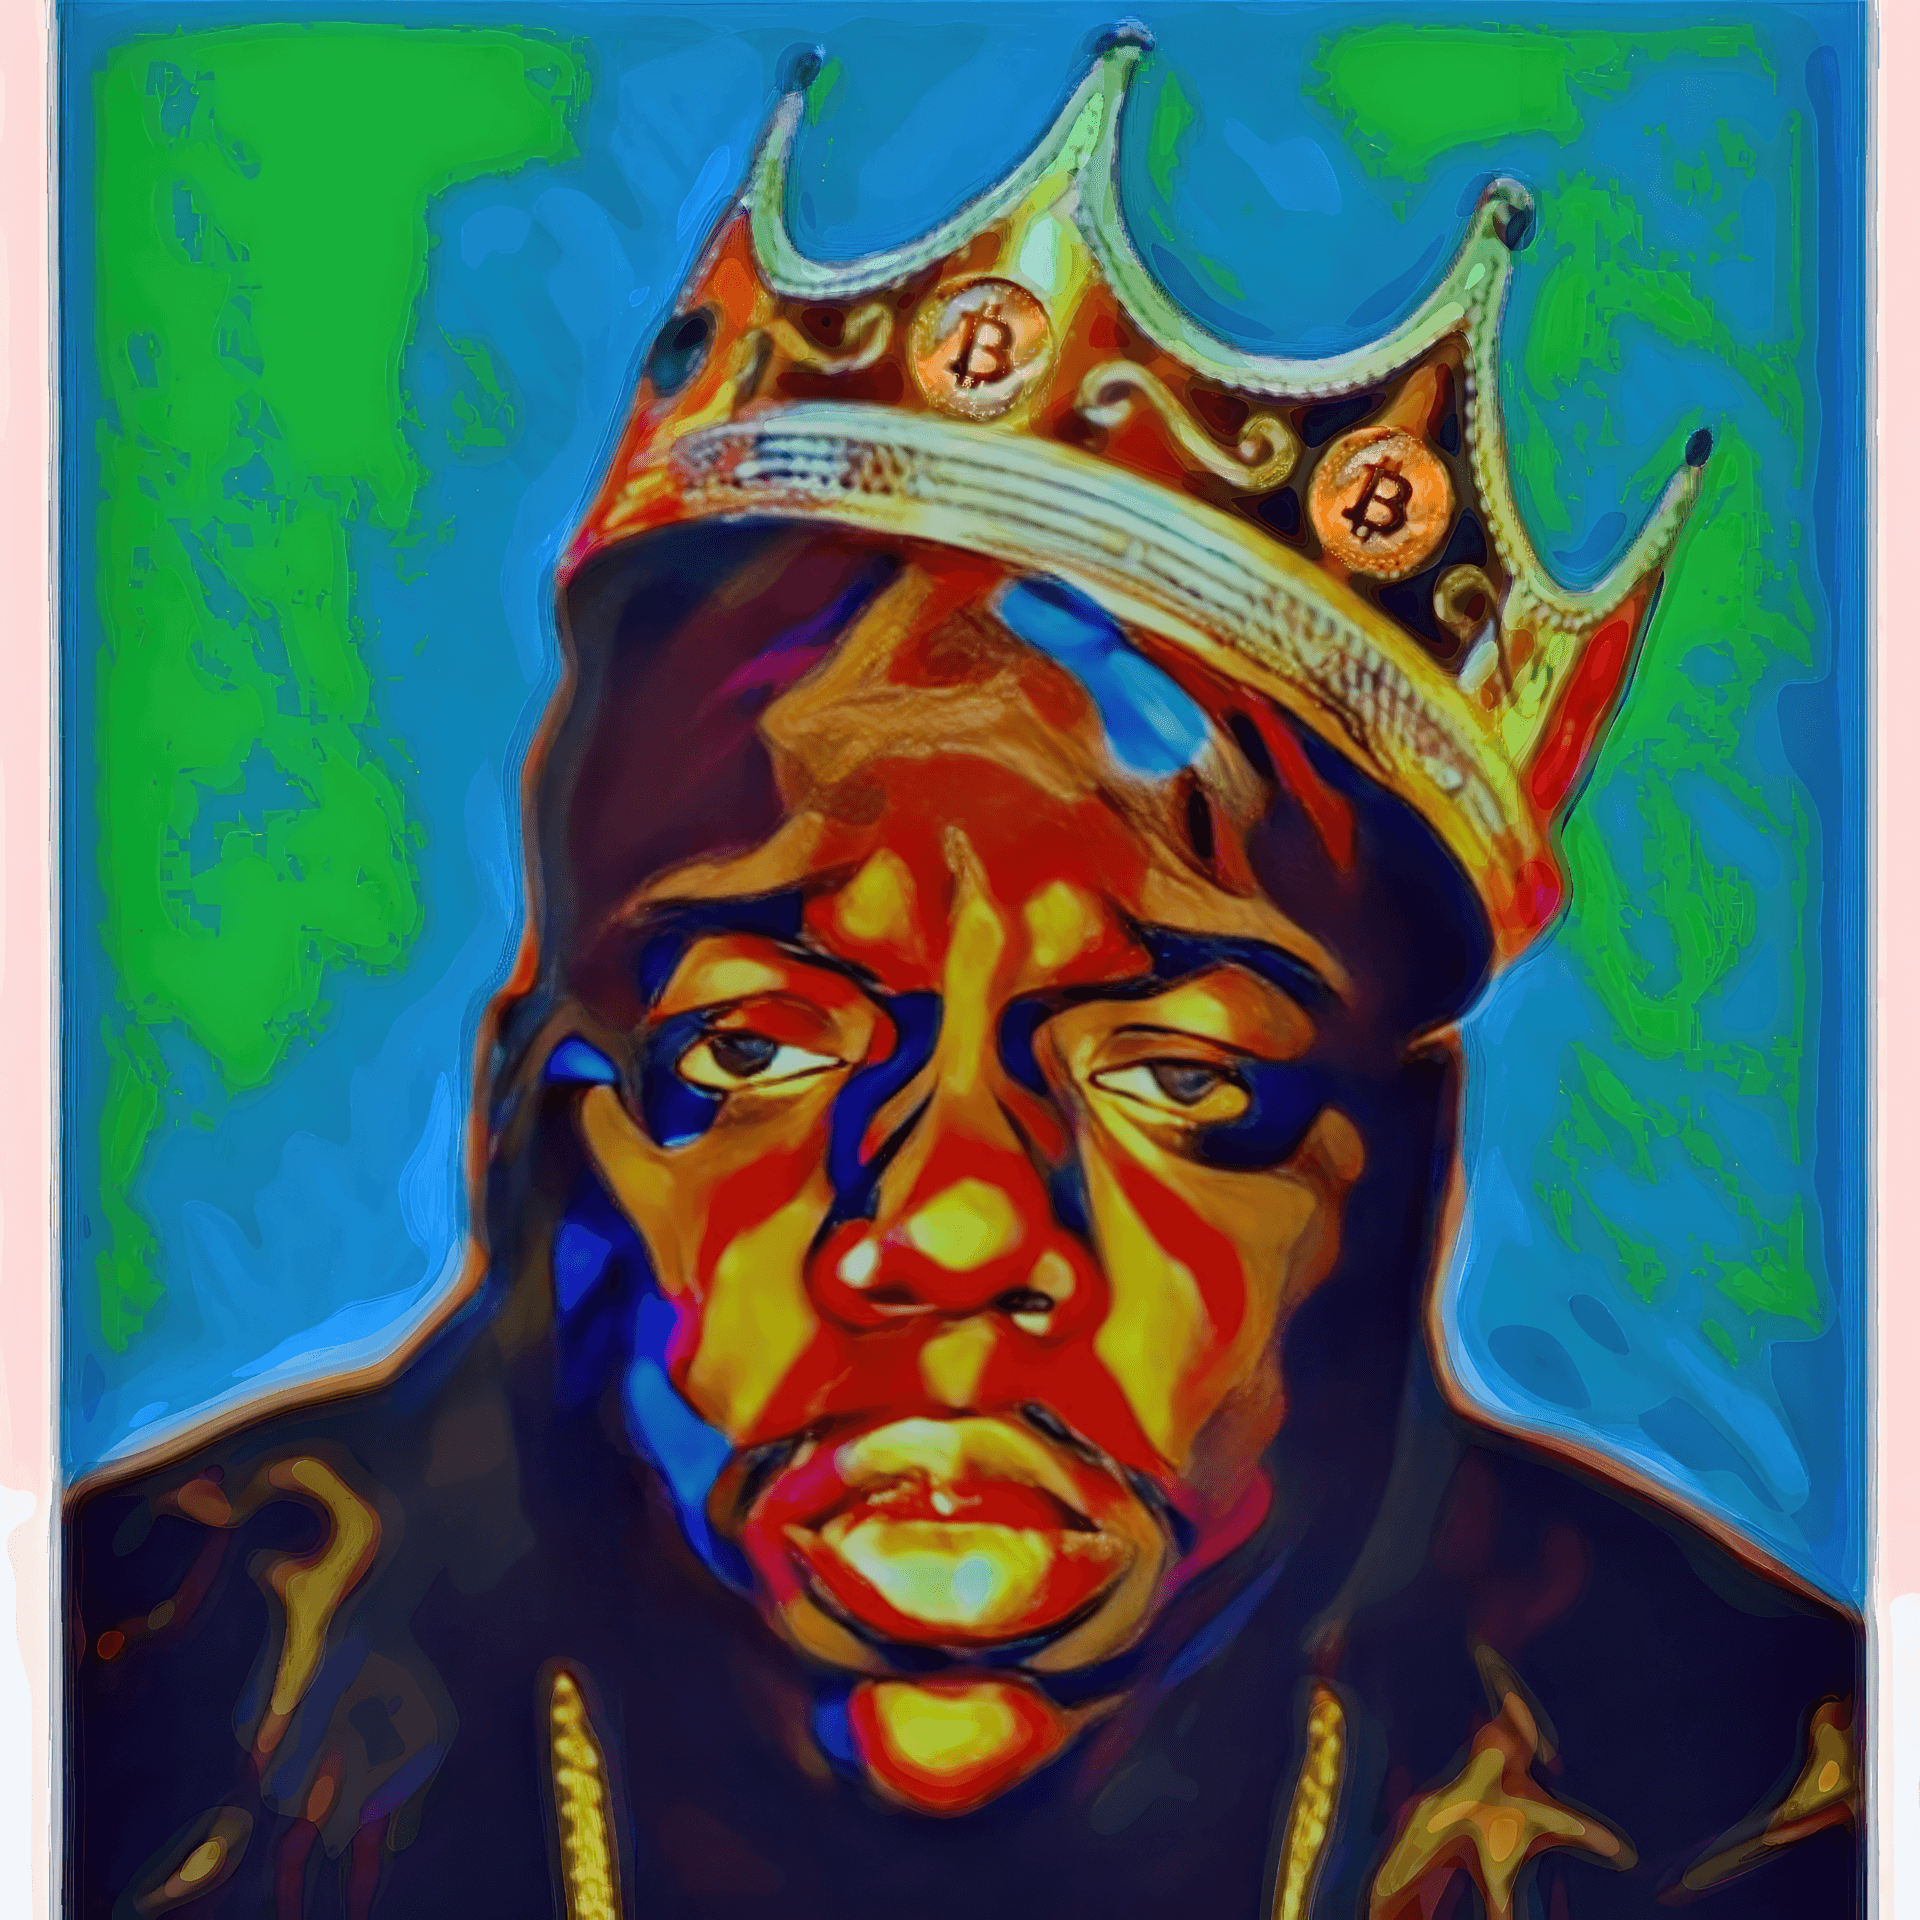 "The Notorious B.T.C." Print